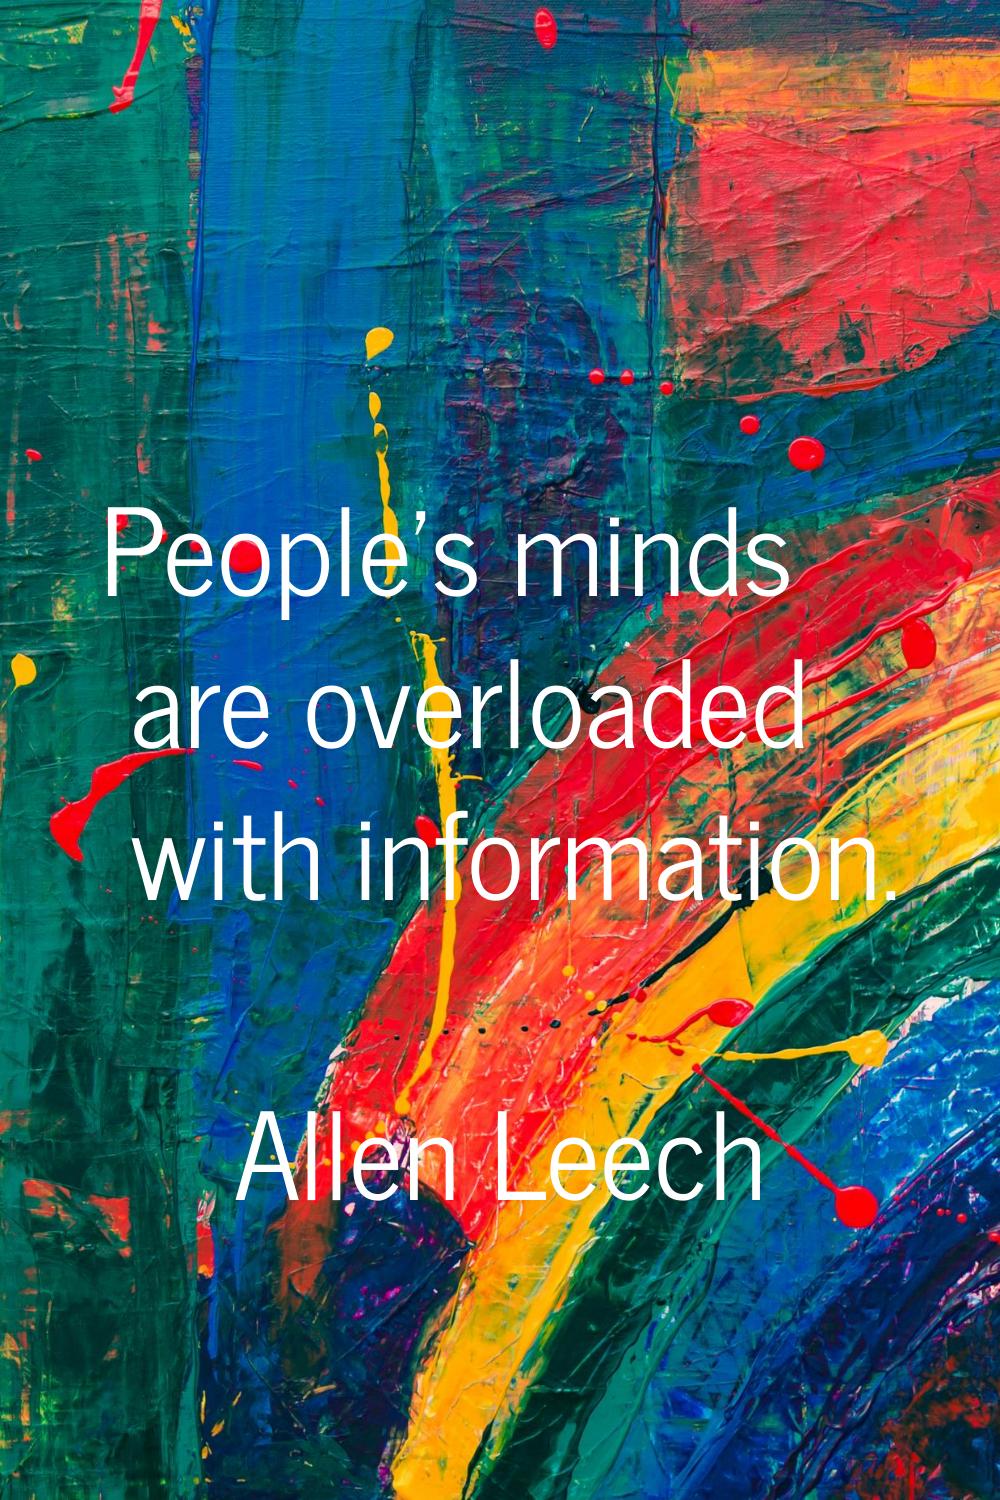 People's minds are overloaded with information.